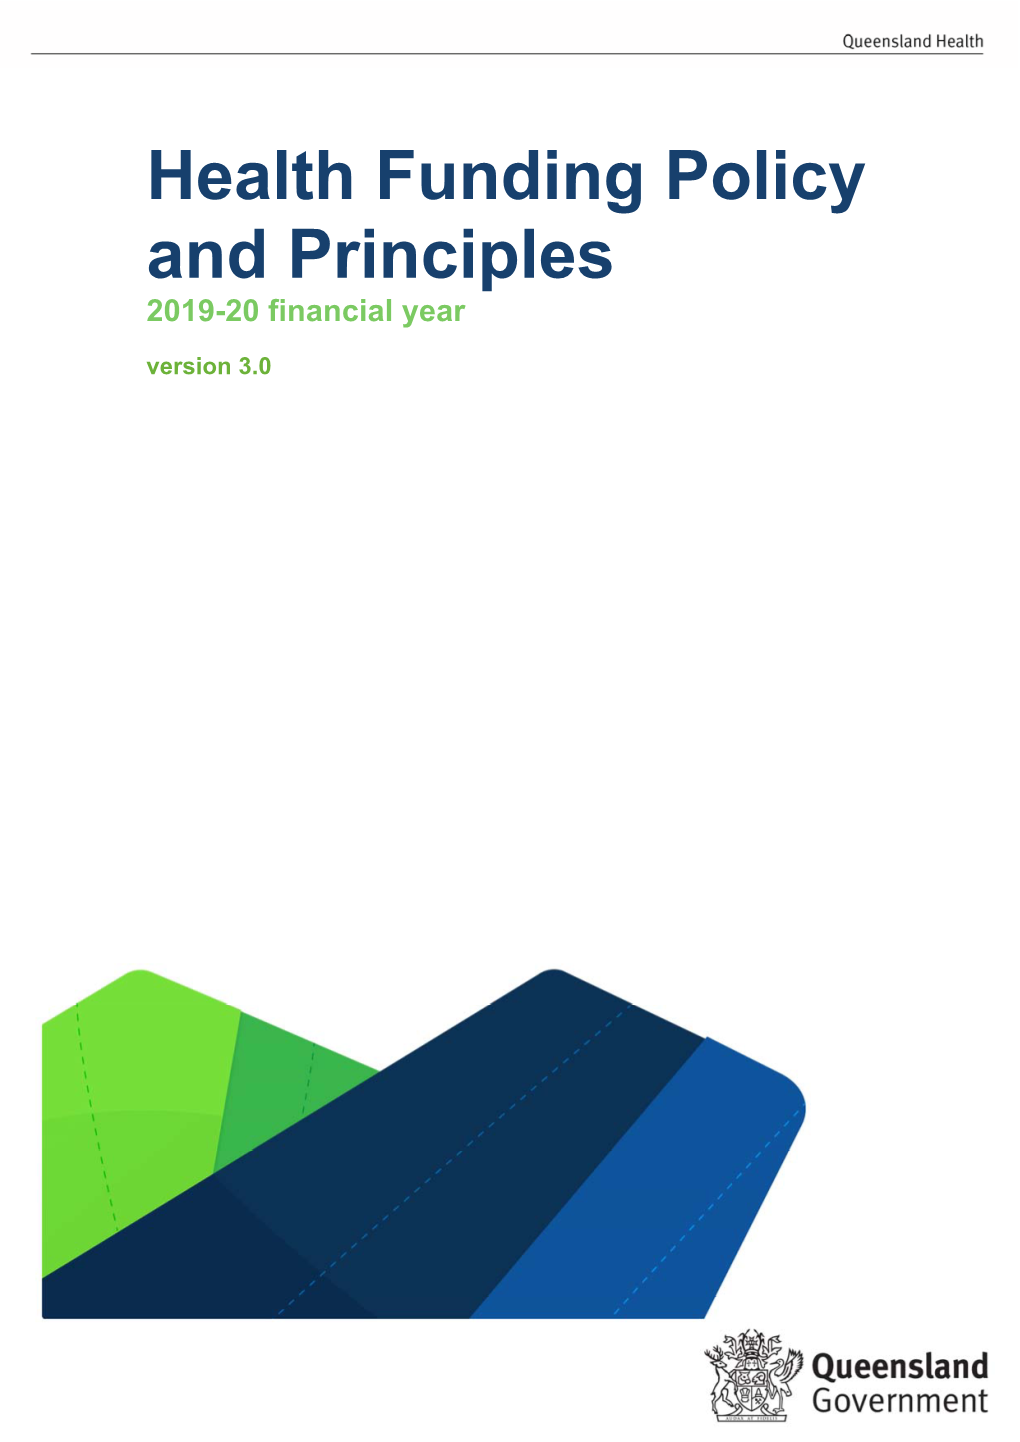 Queensland Health Funding Policy and Principles 2019-20 Version